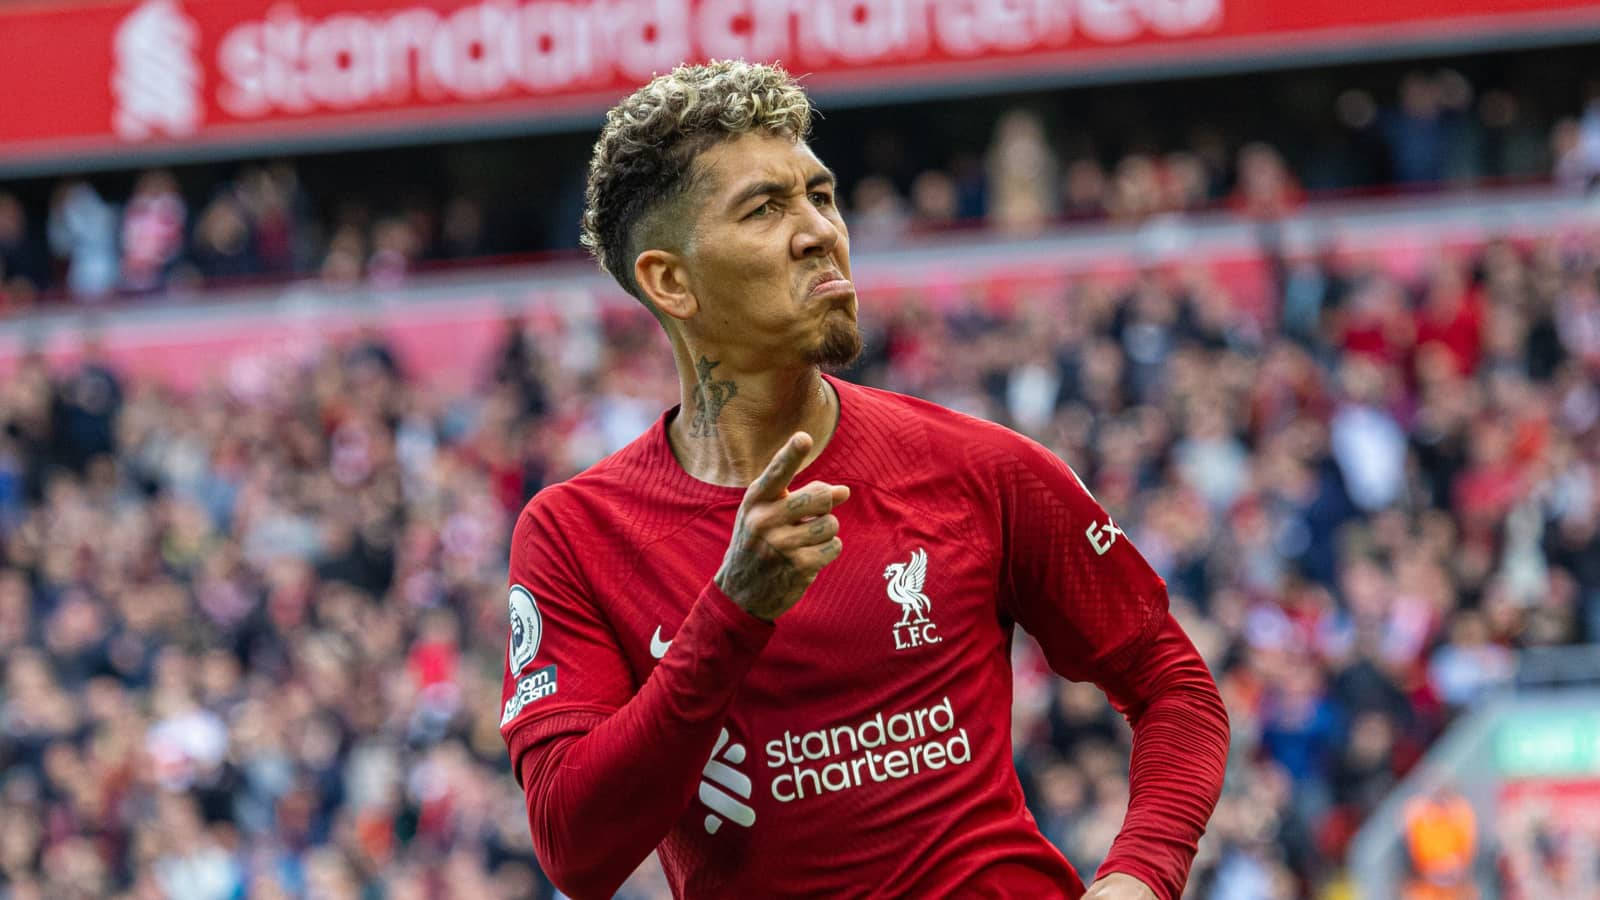 Robertofirmino Roligt Ansikte (for A Computer Or Mobile Wallpaper With Roberto Firmino's Funny Face) Wallpaper